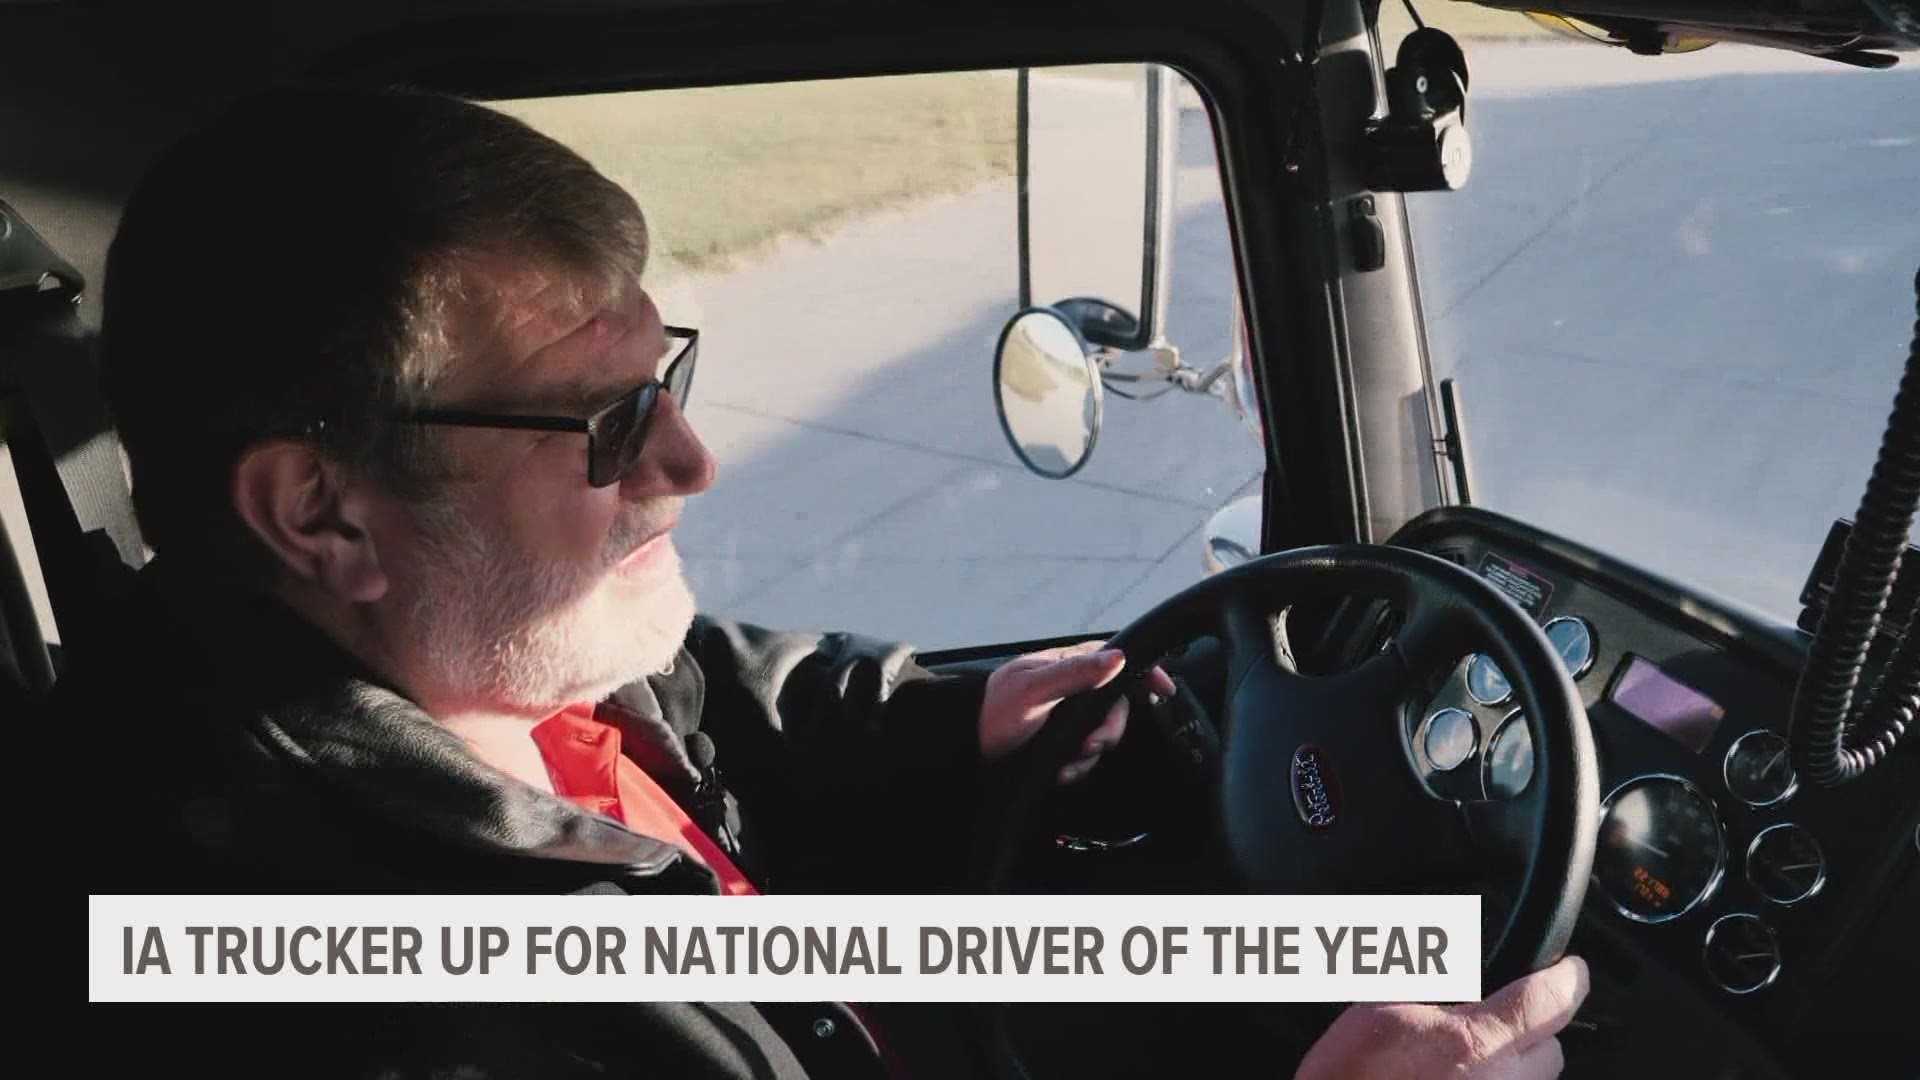 Steve Alliger has spent more than two decades on the road, with an unblemished record of safe driving.